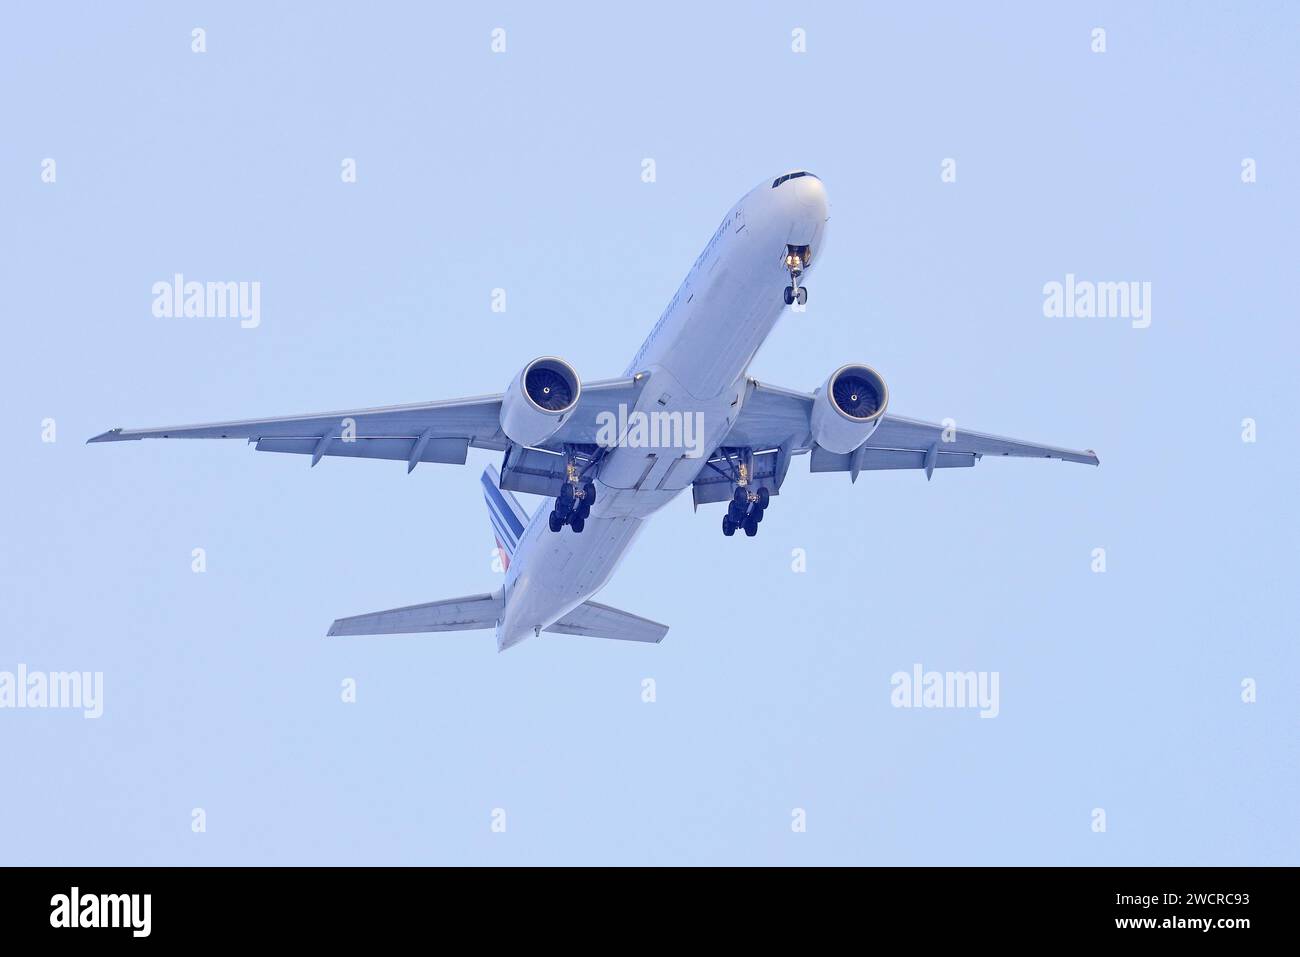 Plane flying to destination, Montreal, Canada Stock Photo